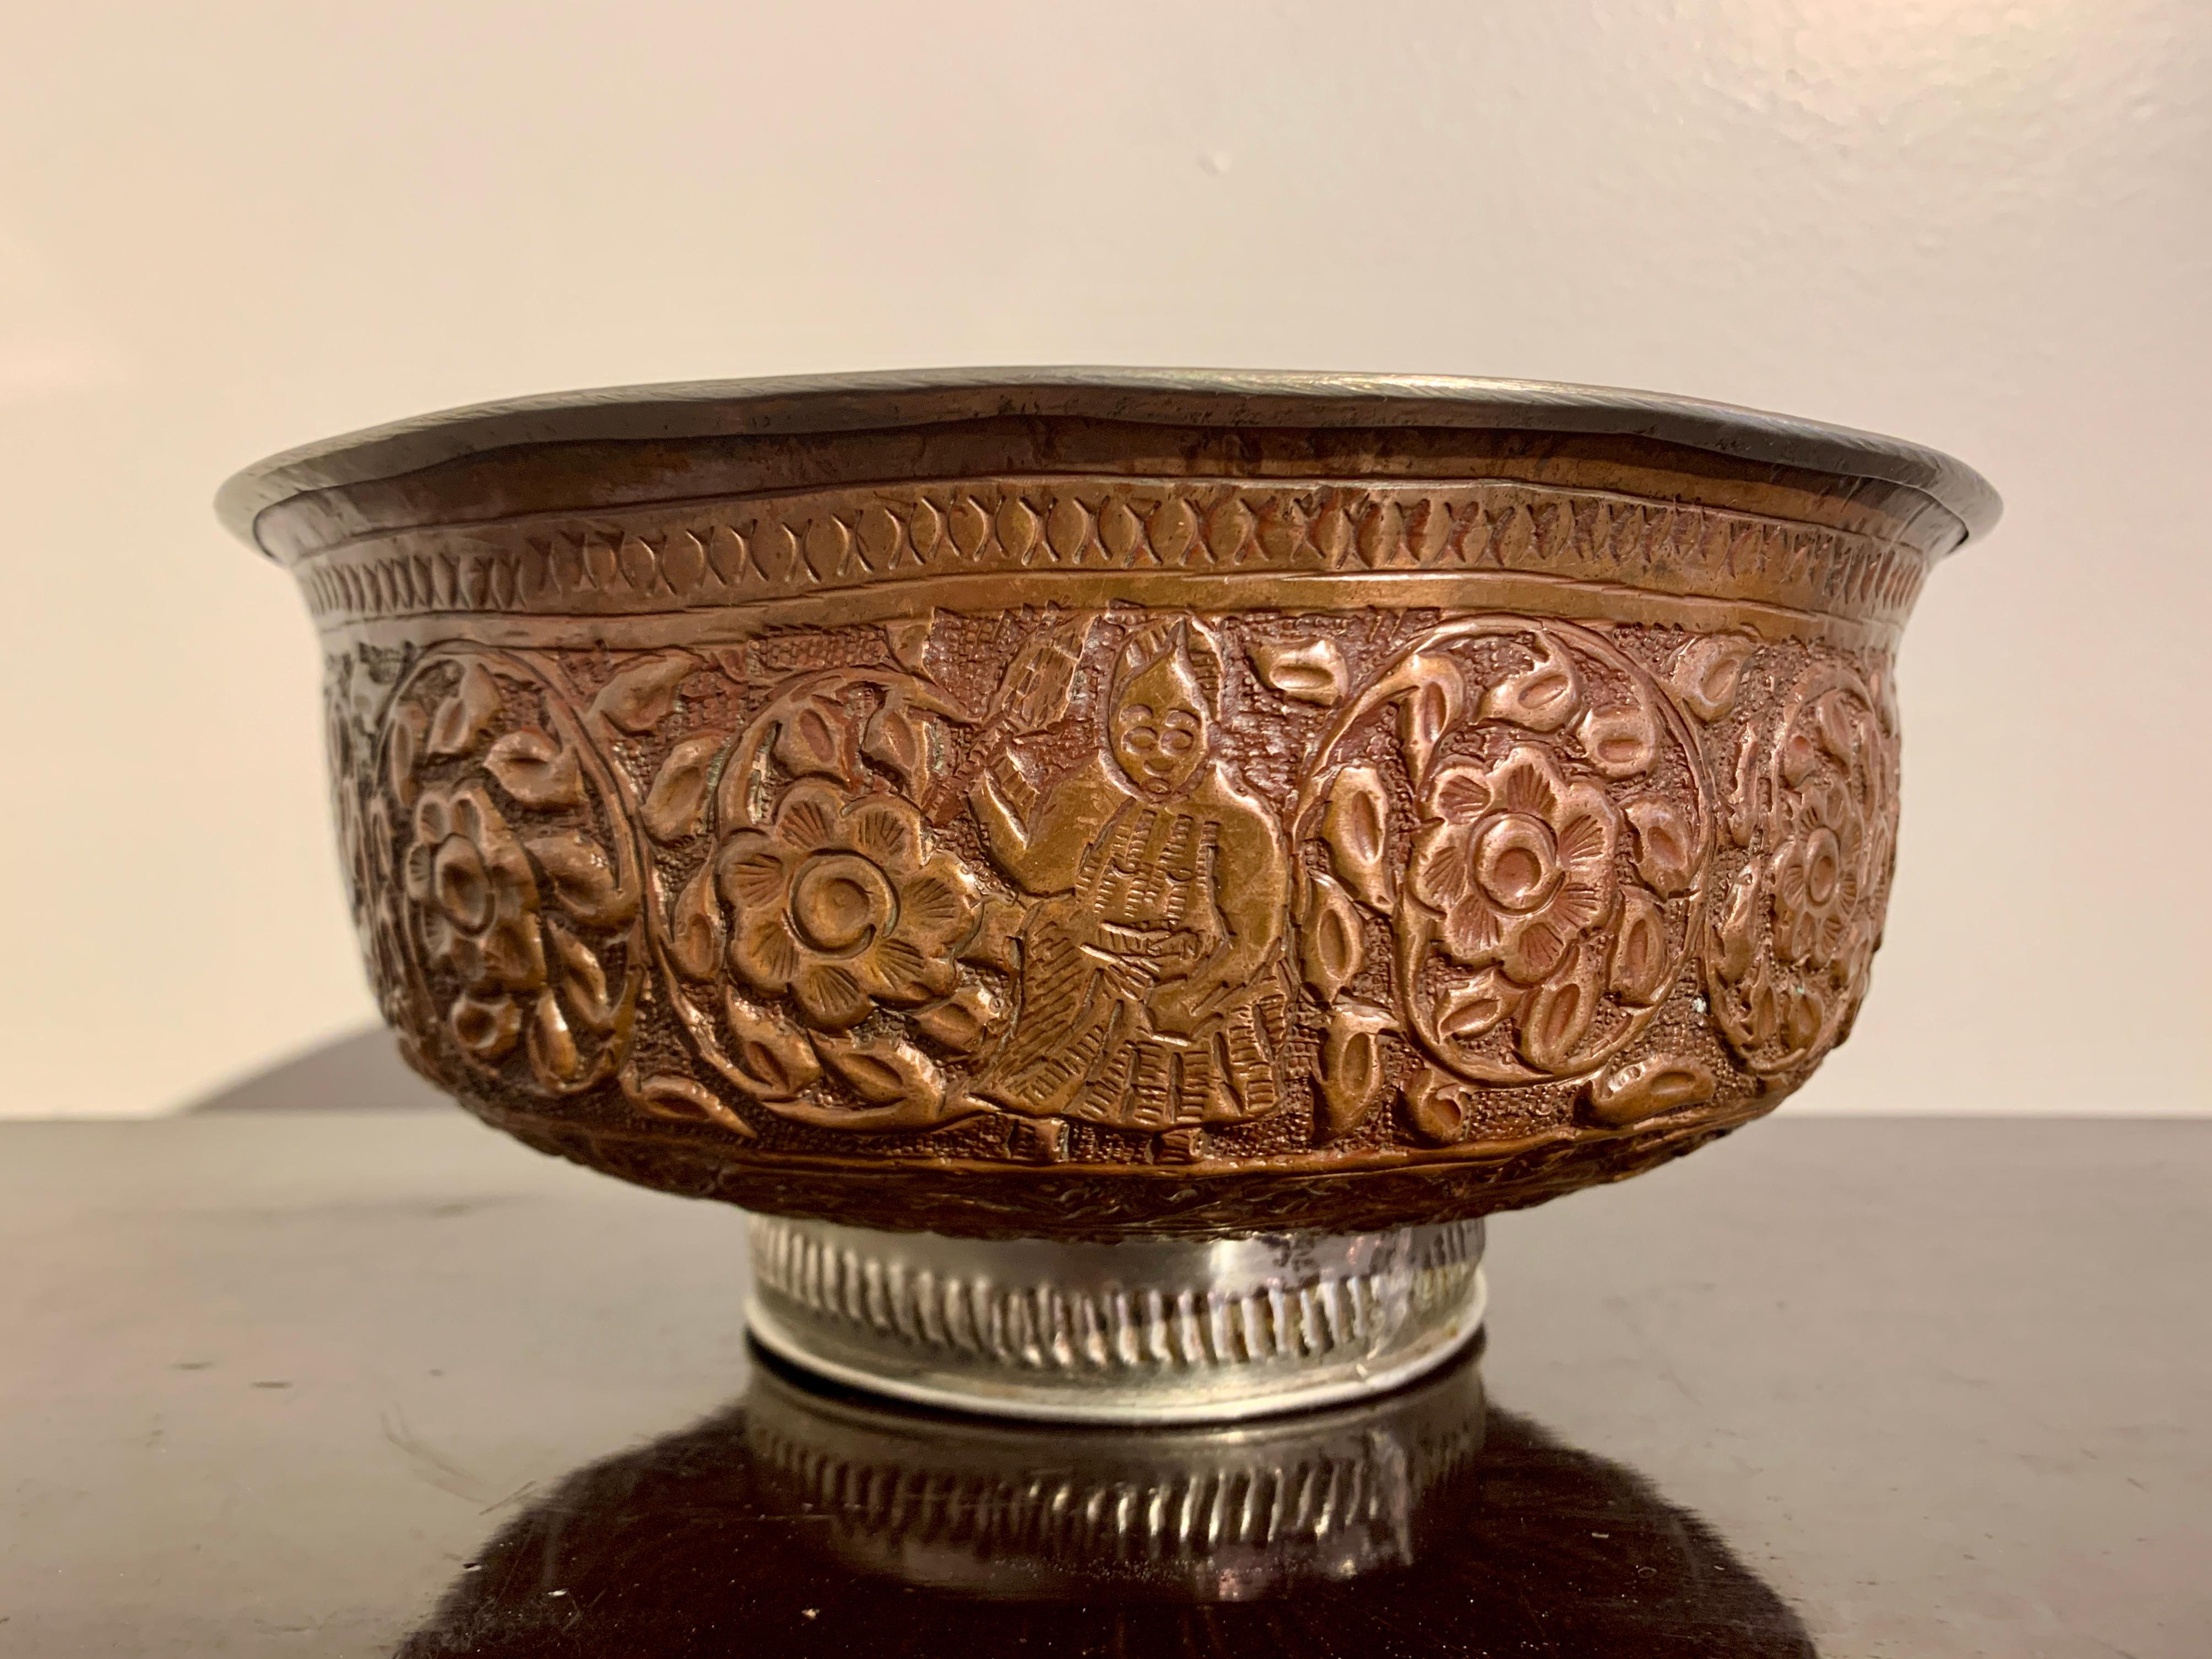 A large and boldly decorated Kashmiri repousse copper bowl, early 20th century, Kashmir.

Set upon a short pedestal foot, the copper bowl features high walls and a slightly everted rim. The body of the bowl is decorated in wonderful raised